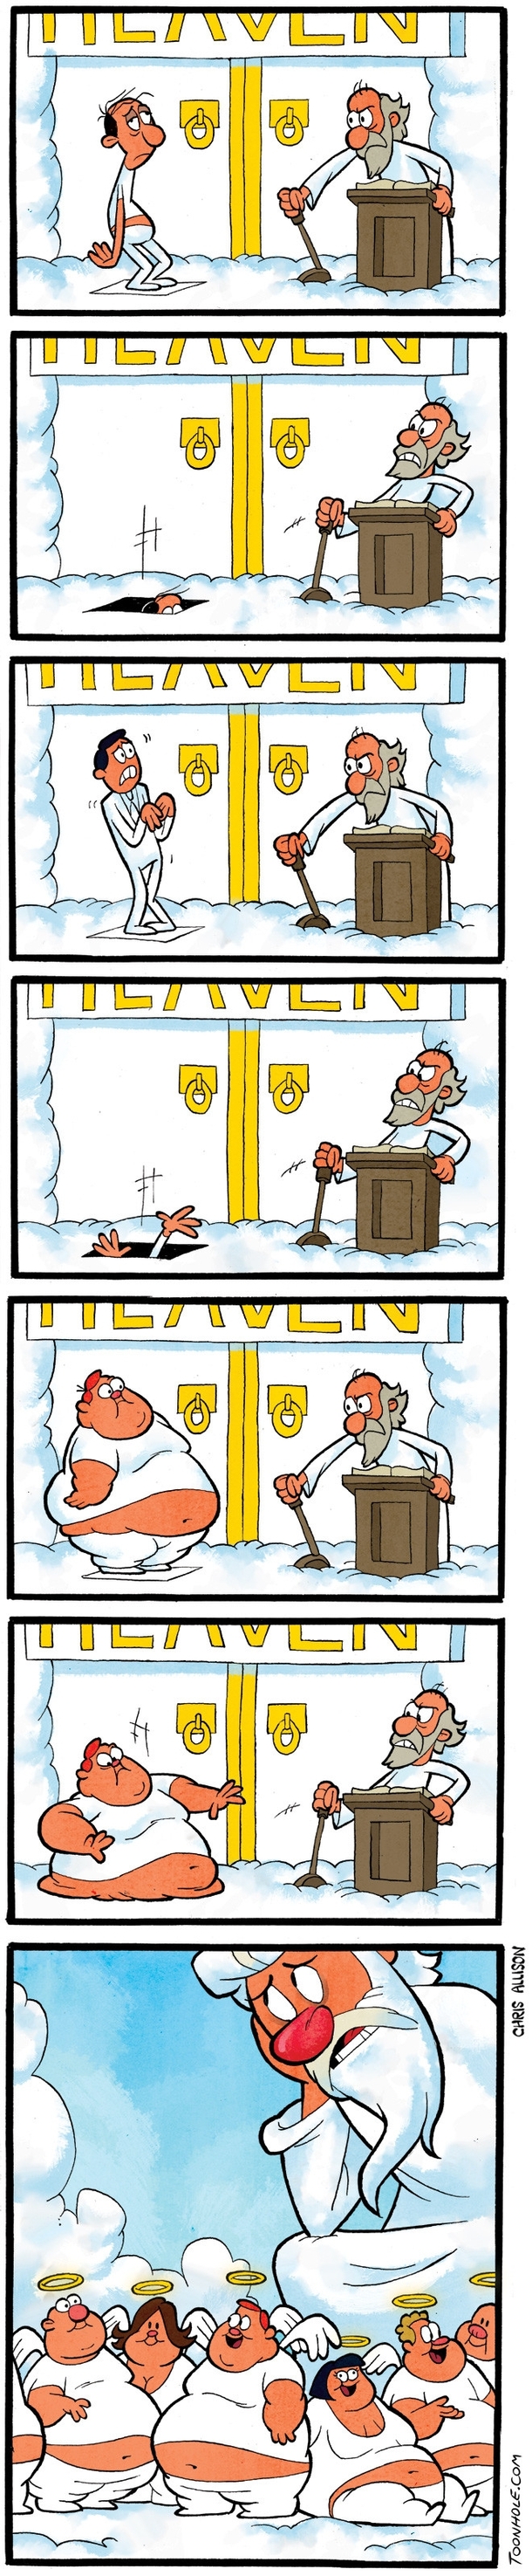 Getting into Heaven